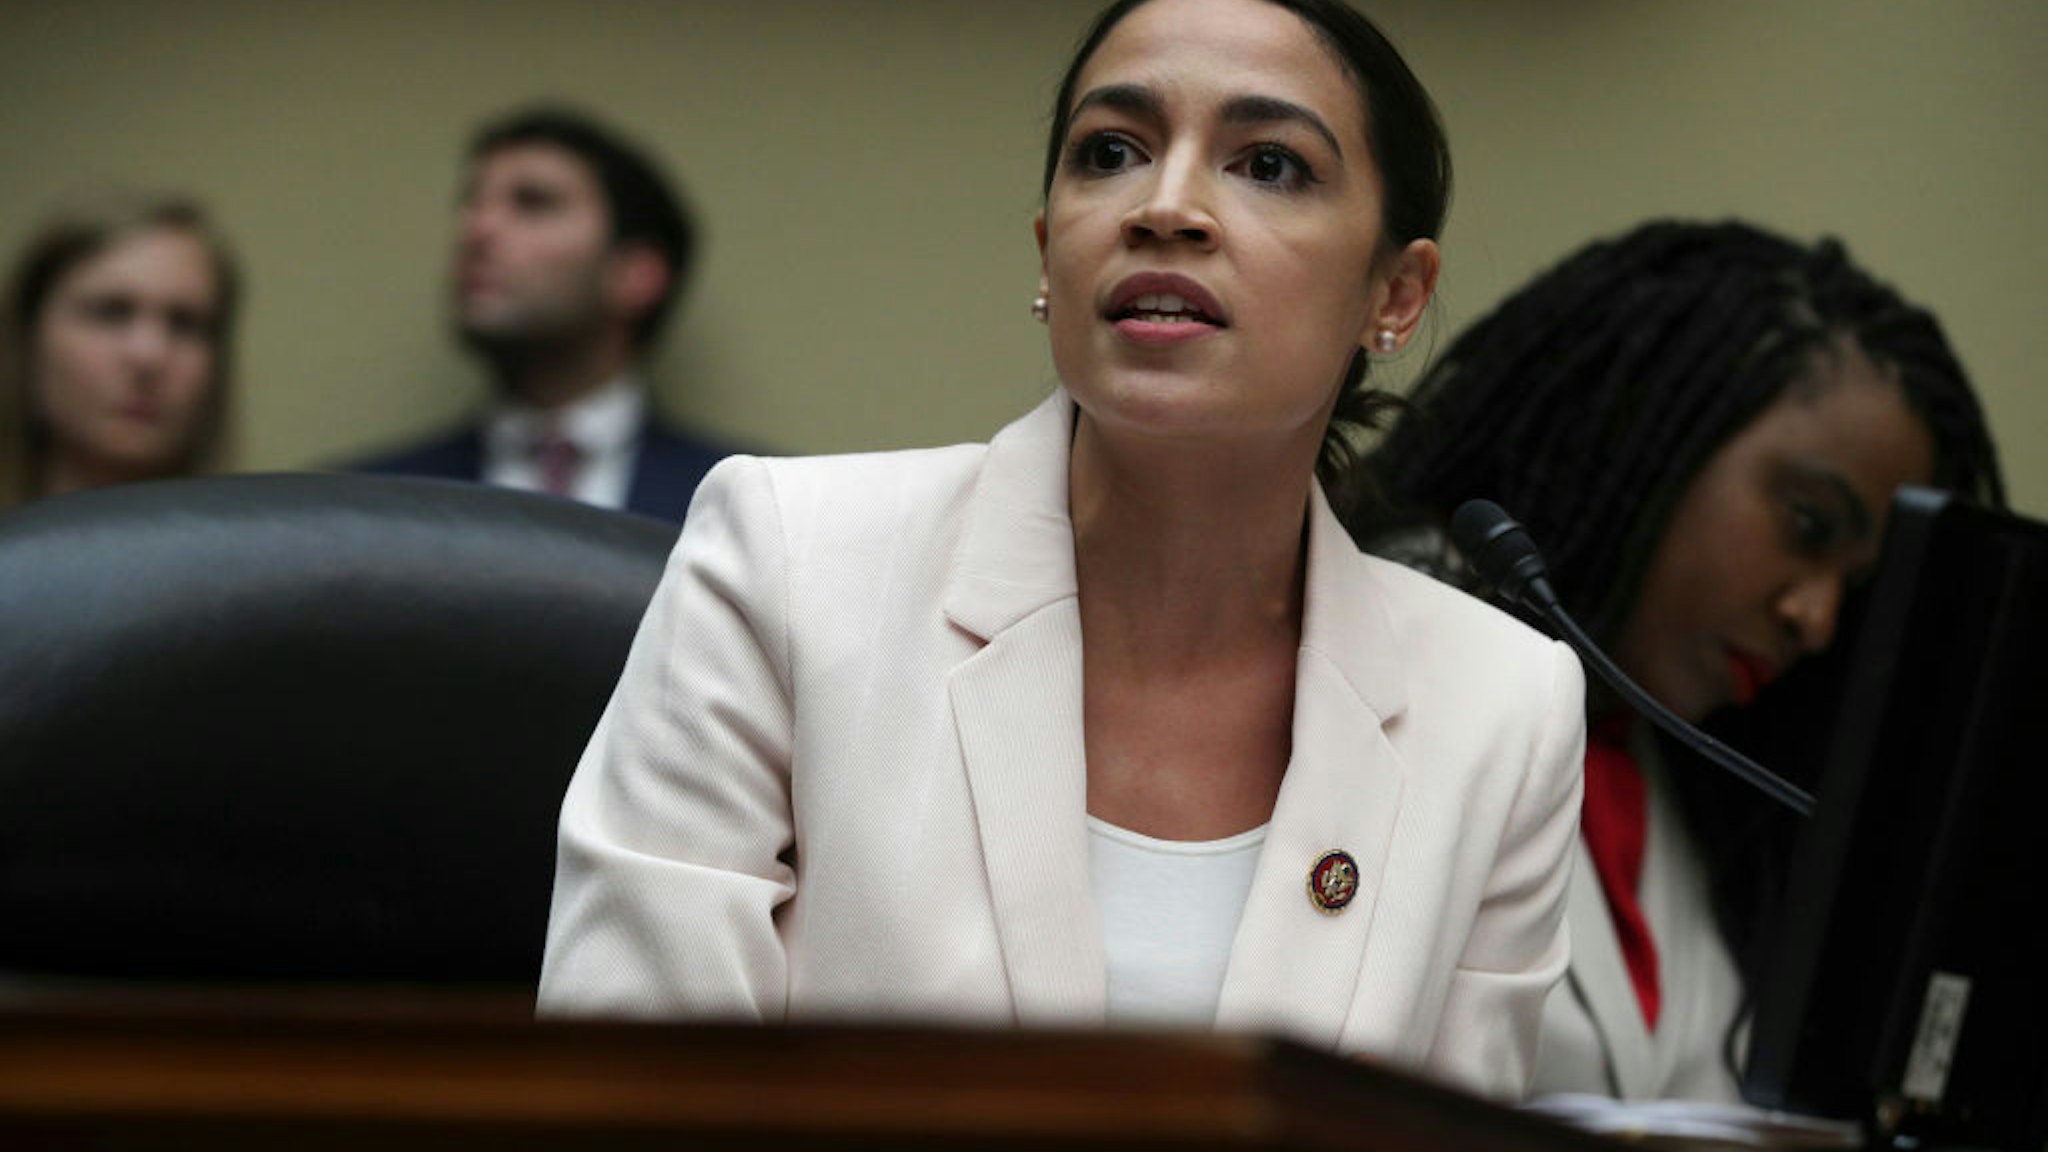 WASHINGTON, DC - JUNE 12: U.S. Rep. Alexandria Ocasio-Cortez (D-NY) speaks during a meeting of the House Committee on Oversight and Reform June 12, 2019 on Capitol Hill in Washington, DC. The committee held a meeting on “a resolution recommending that the House of Representatives find the Attorney General and the Secretary of Commerce in contempt of Congress.”